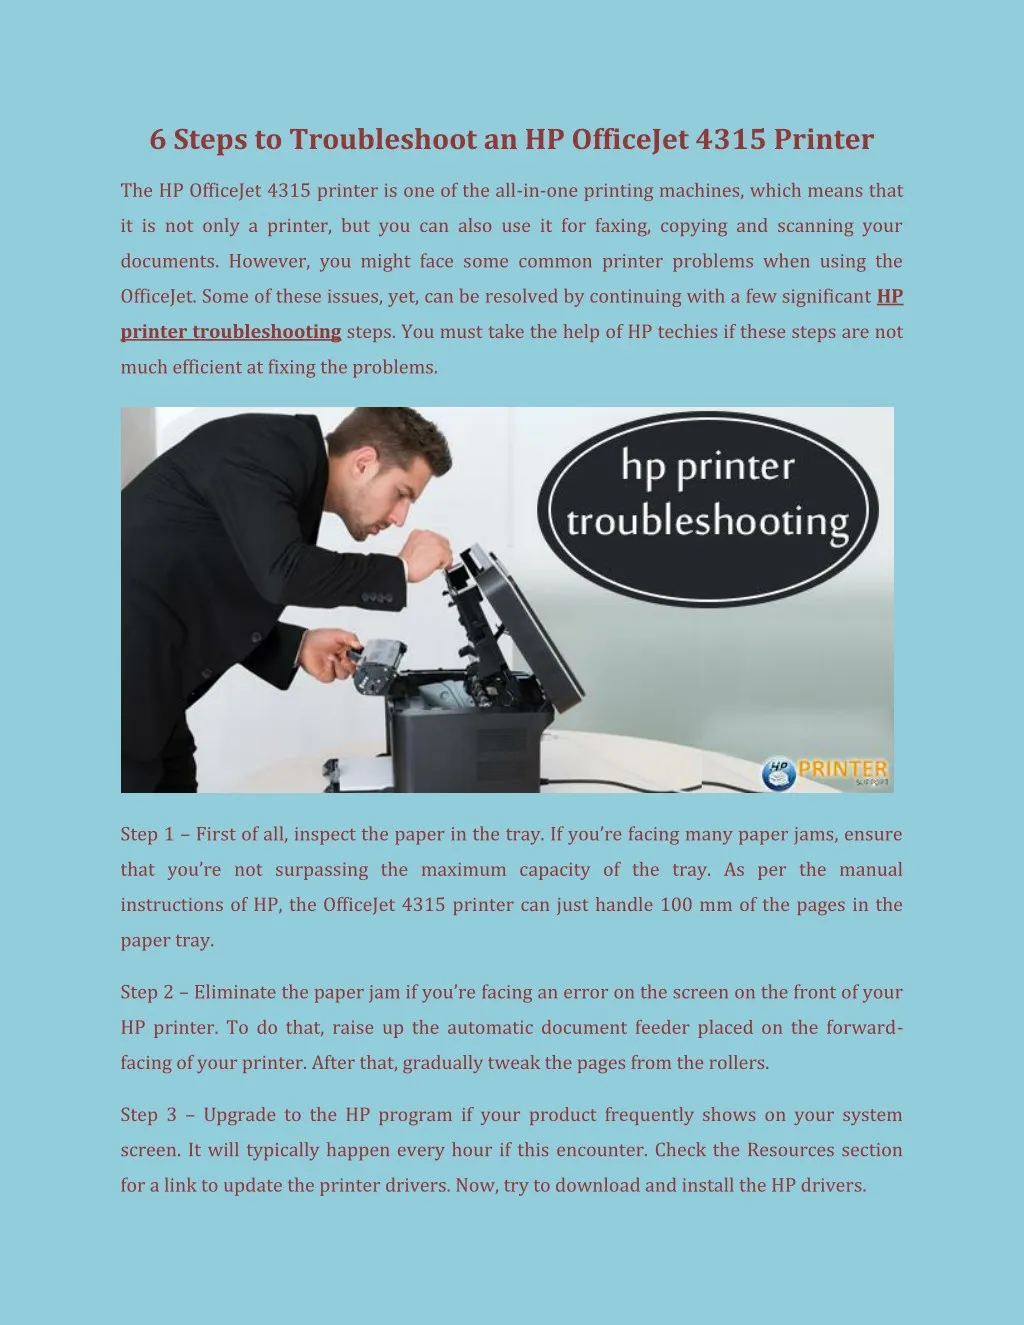 Ppt Hp Printer Troubleshooting Powerpoint Presentation Free Download Id7606589 0601